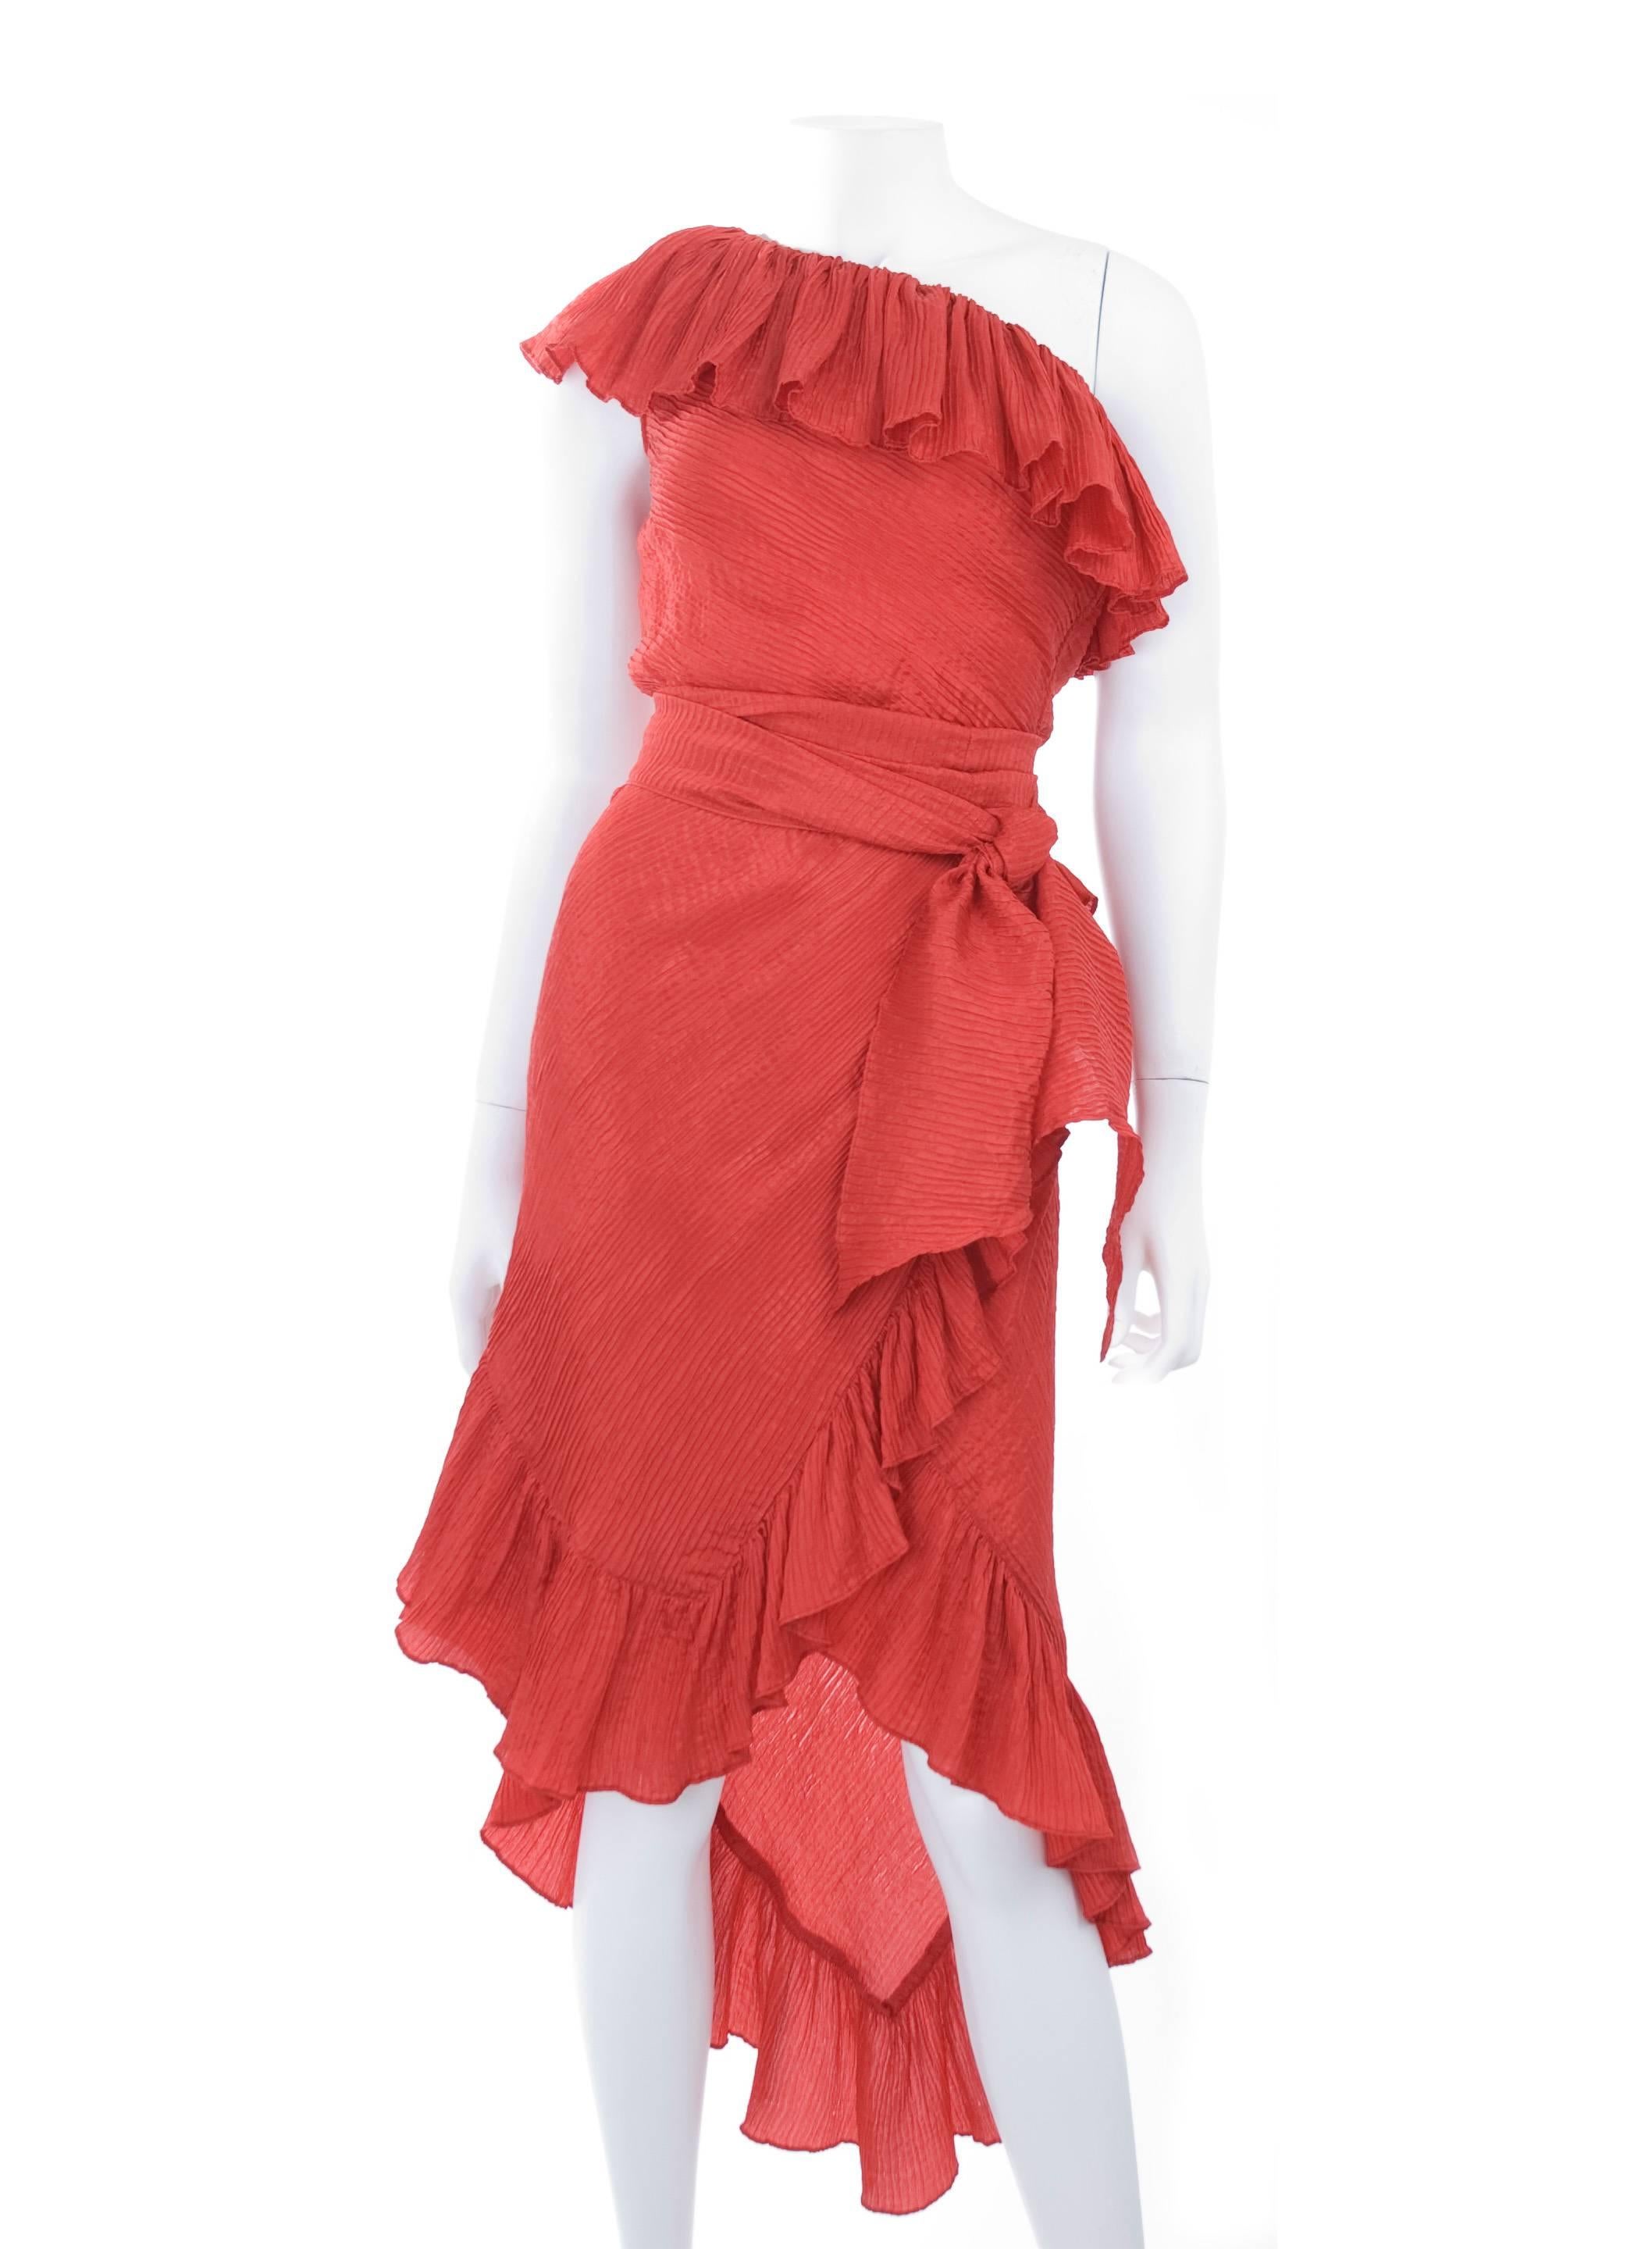 Vintage Yves Saint Laurent Cocktaildress in Red and Asymmetrical Hemline For Sale 1